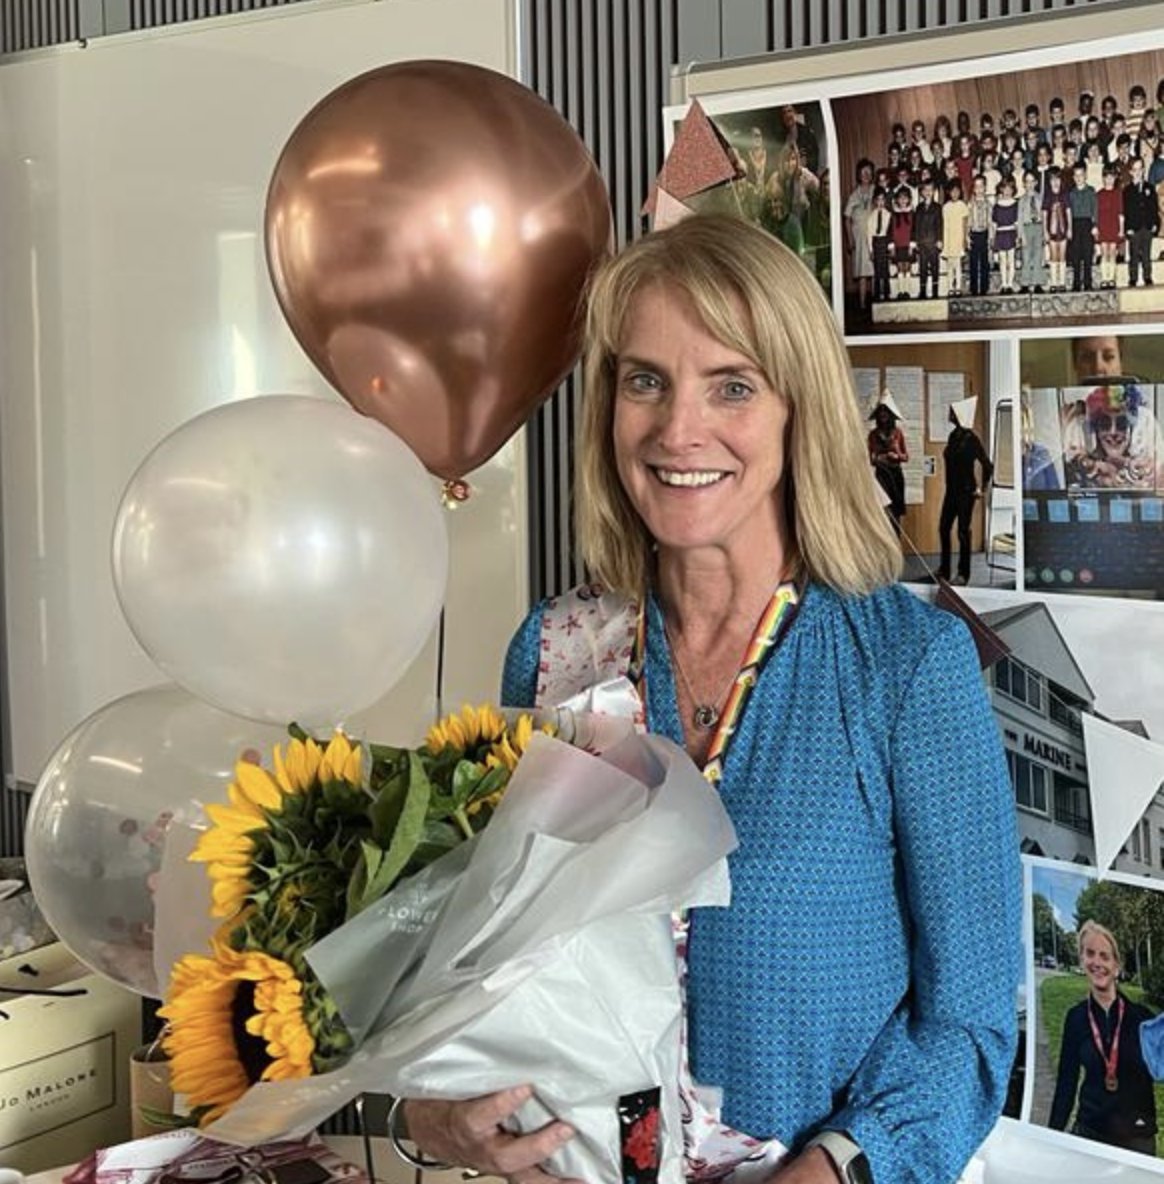 Today the Doctoral College team bids a fond farewell to our Dean, Professor @MarieHMurphy. The team would like to thank you for your leadership, support and energy over the last five years and we wish you all the very best for the next chapter with @UoE_PAHRC